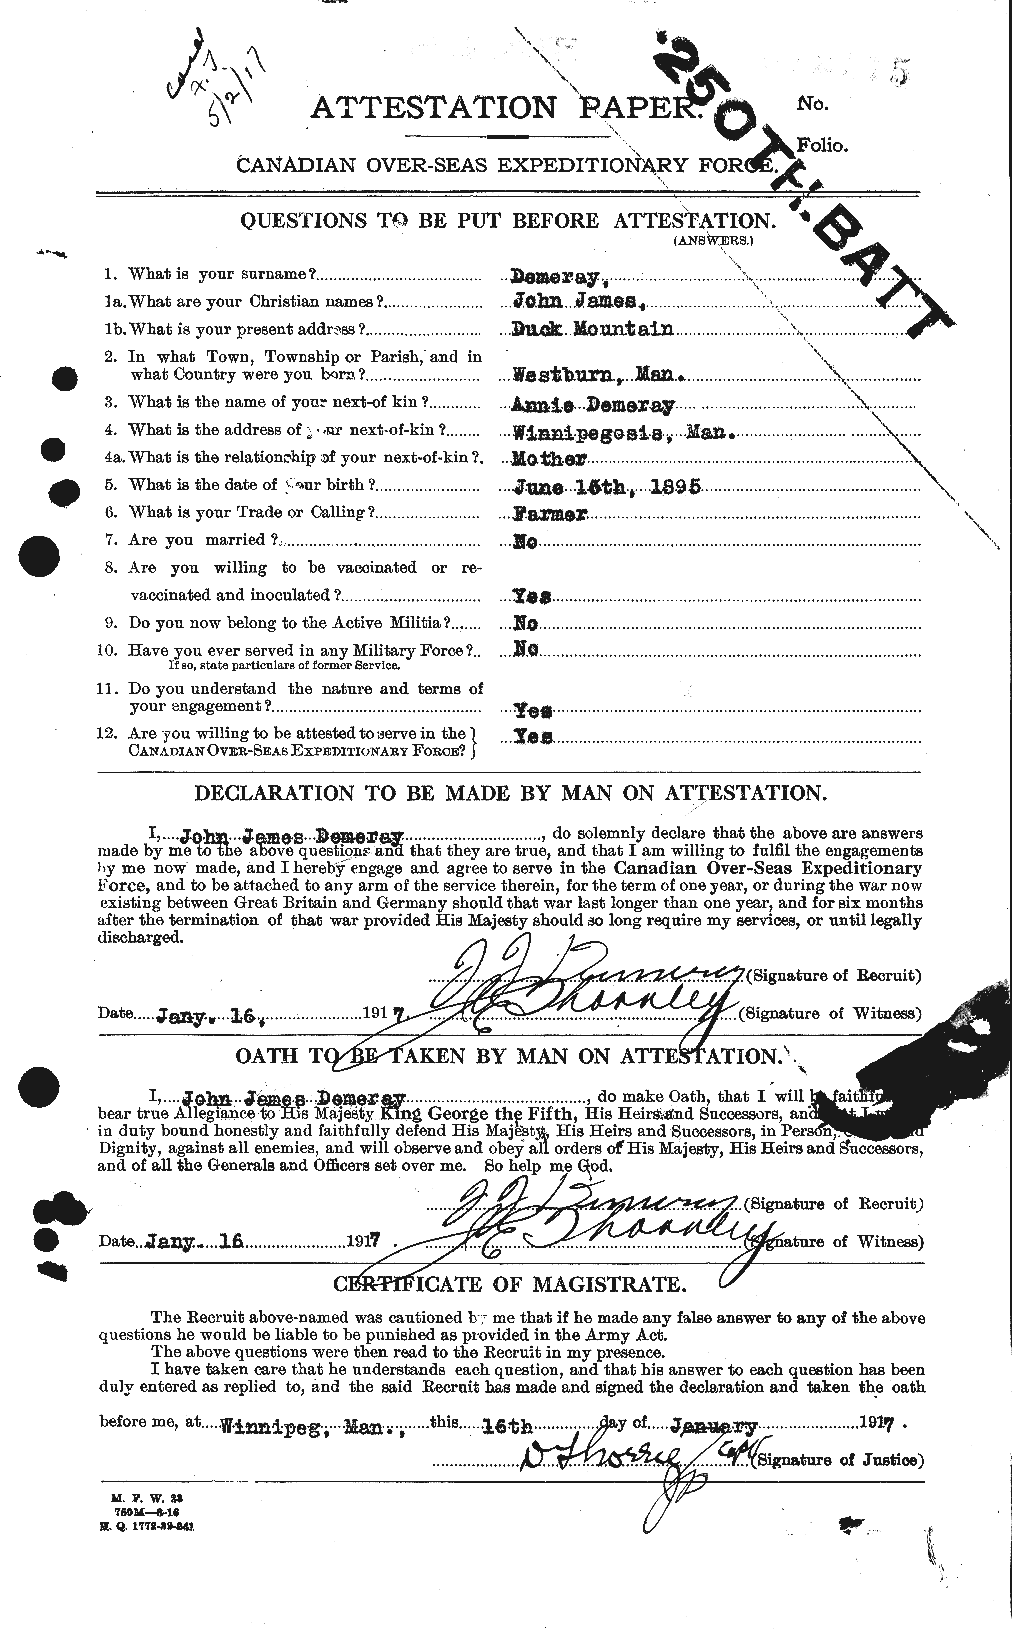 Personnel Records of the First World War - CEF 287829a